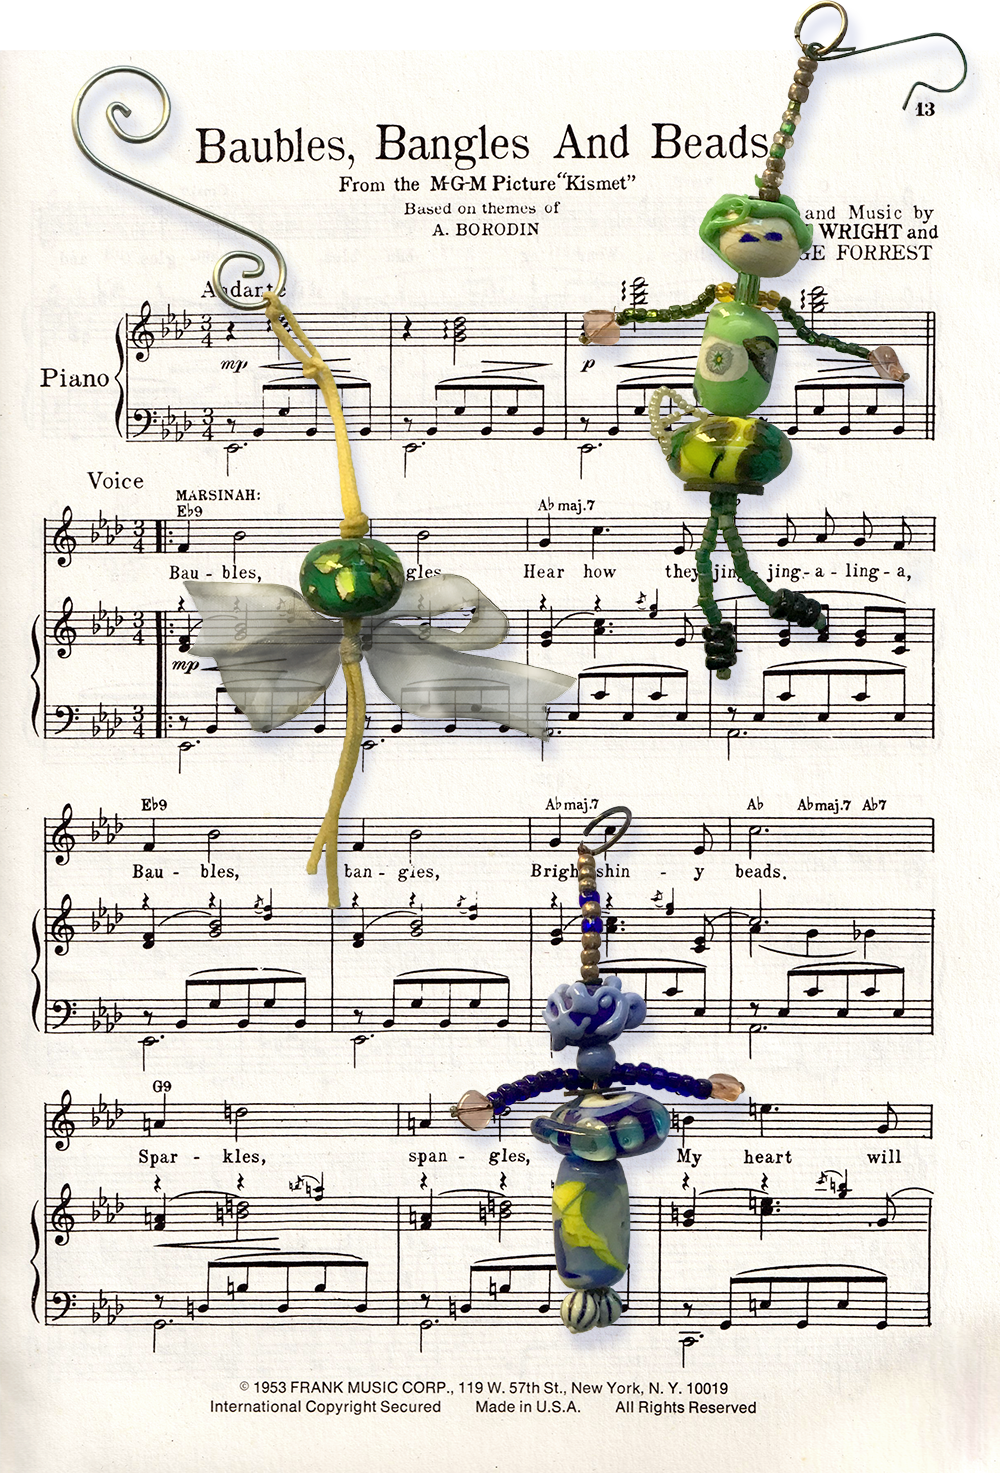 Baubles, Bangles, and Beads sheetmusic with bead ornaments